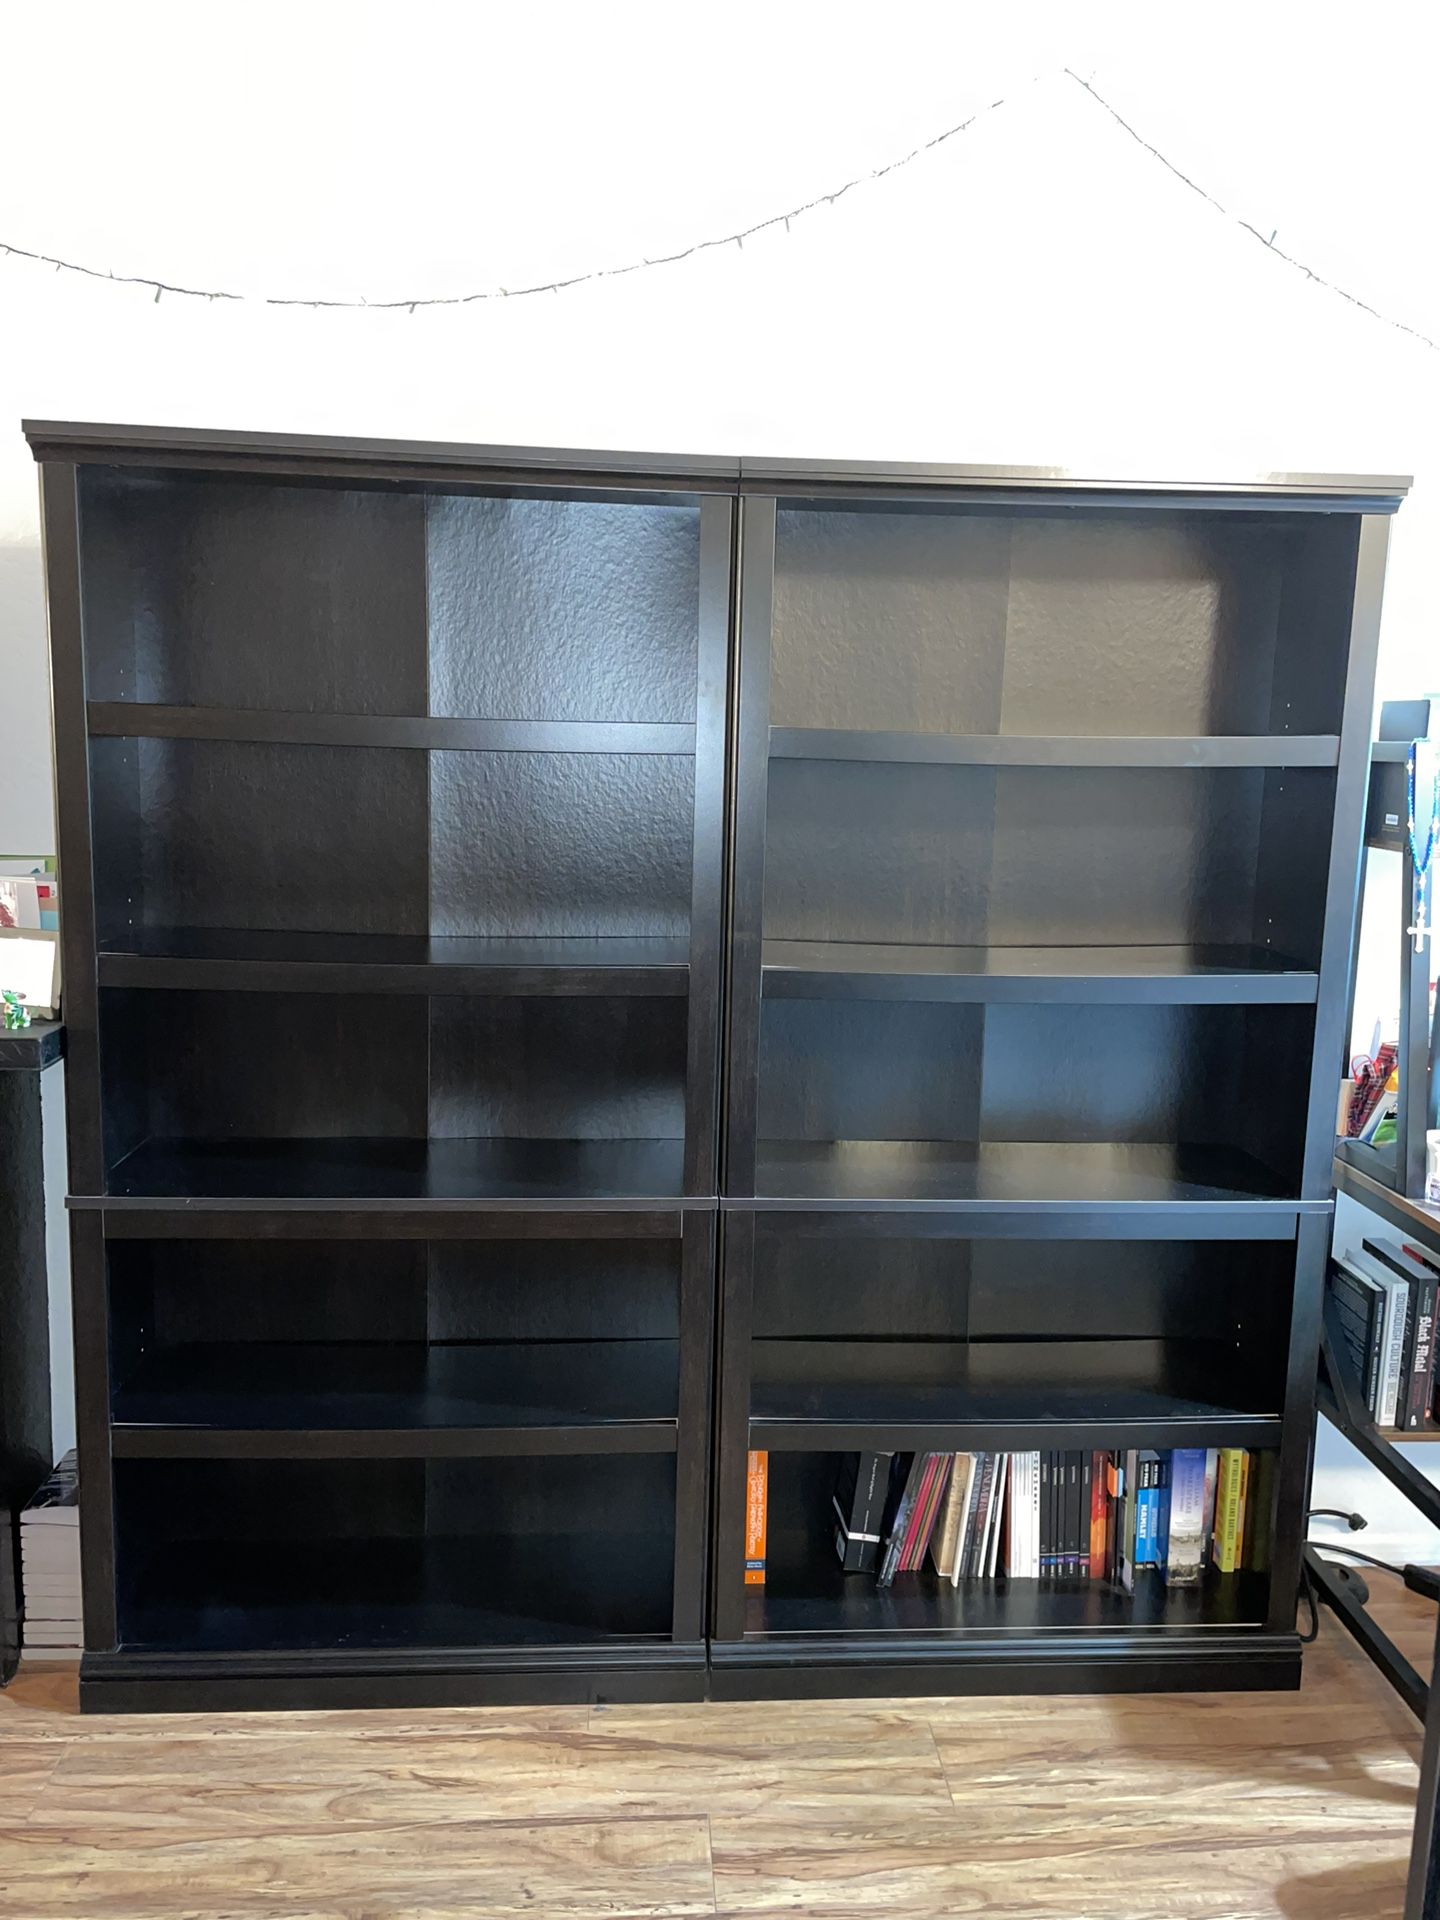 5x Bookshelves (If you only want 1 or 2 or etc., that’s fine too!) 